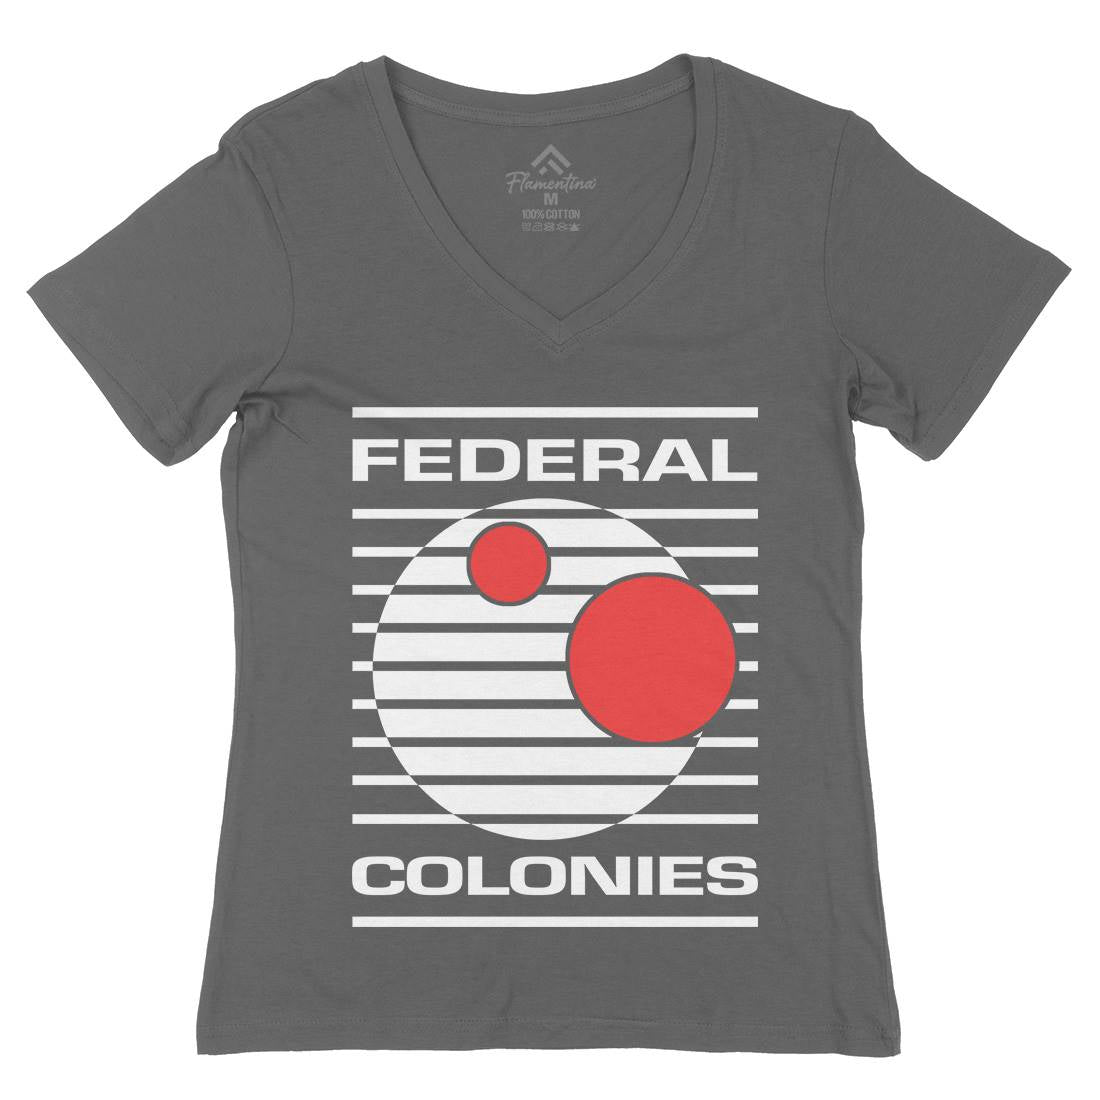 Federal Colonies Womens Organic V-Neck T-Shirt Space D409